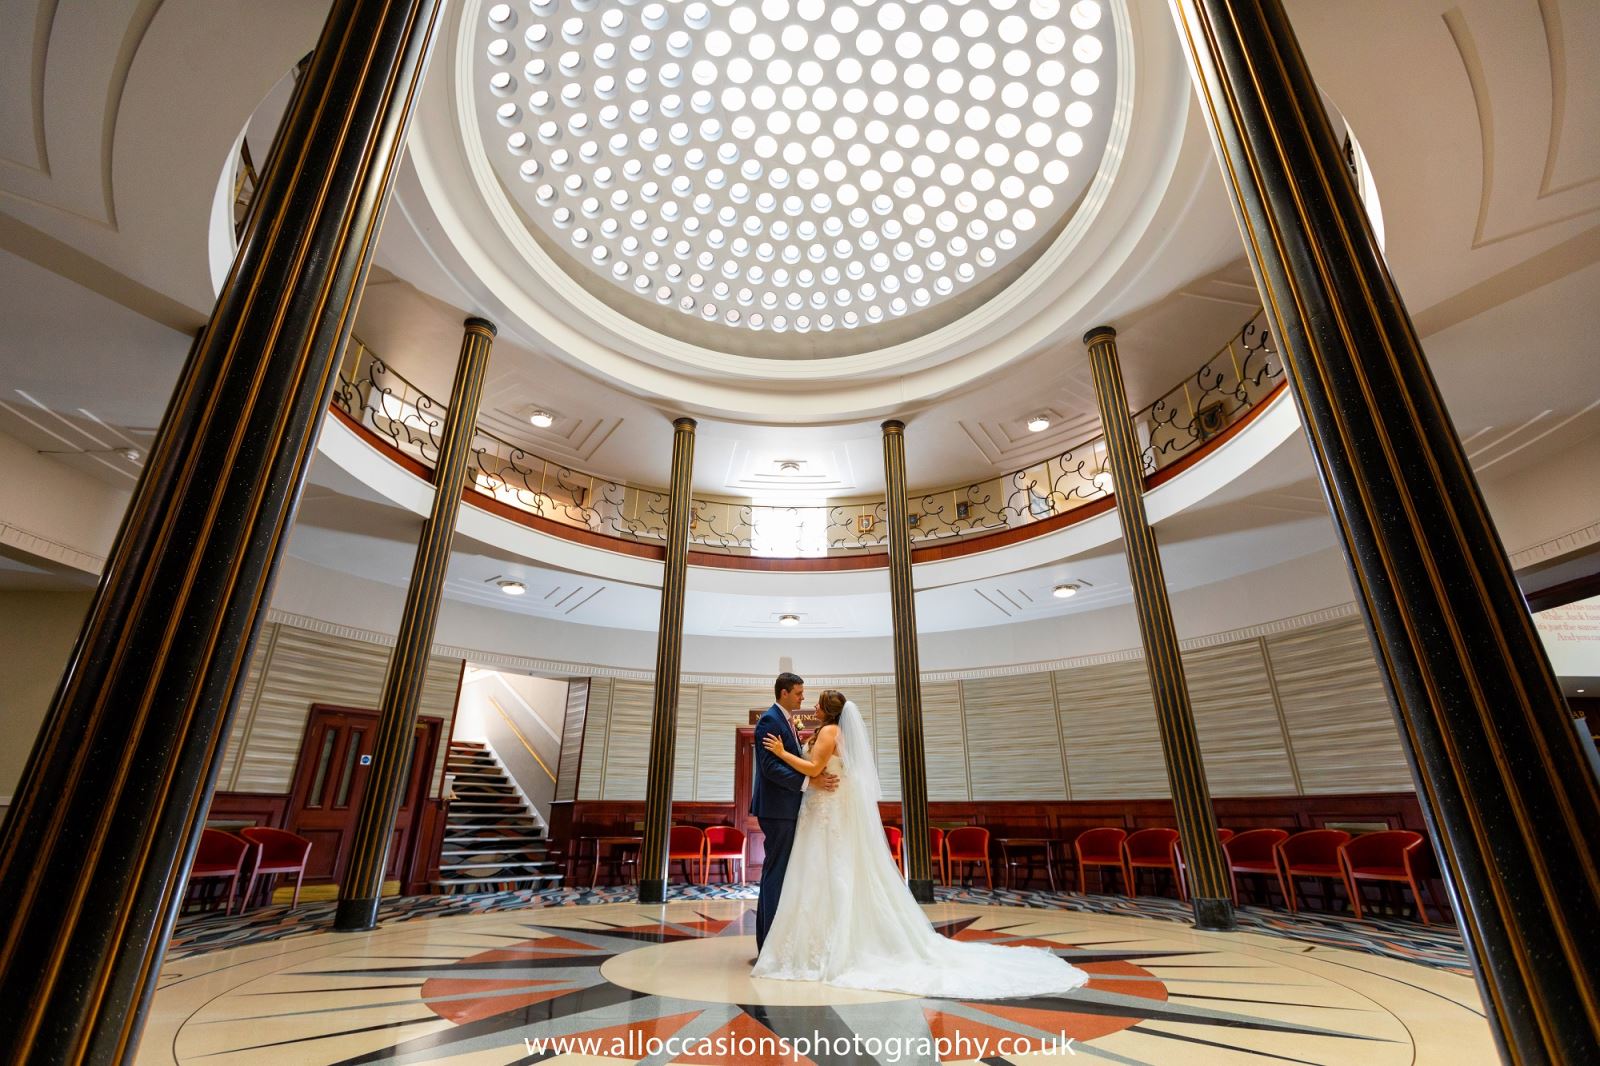 Weddings at the Royal Maritime Hotel - copyright All Occasions Photography